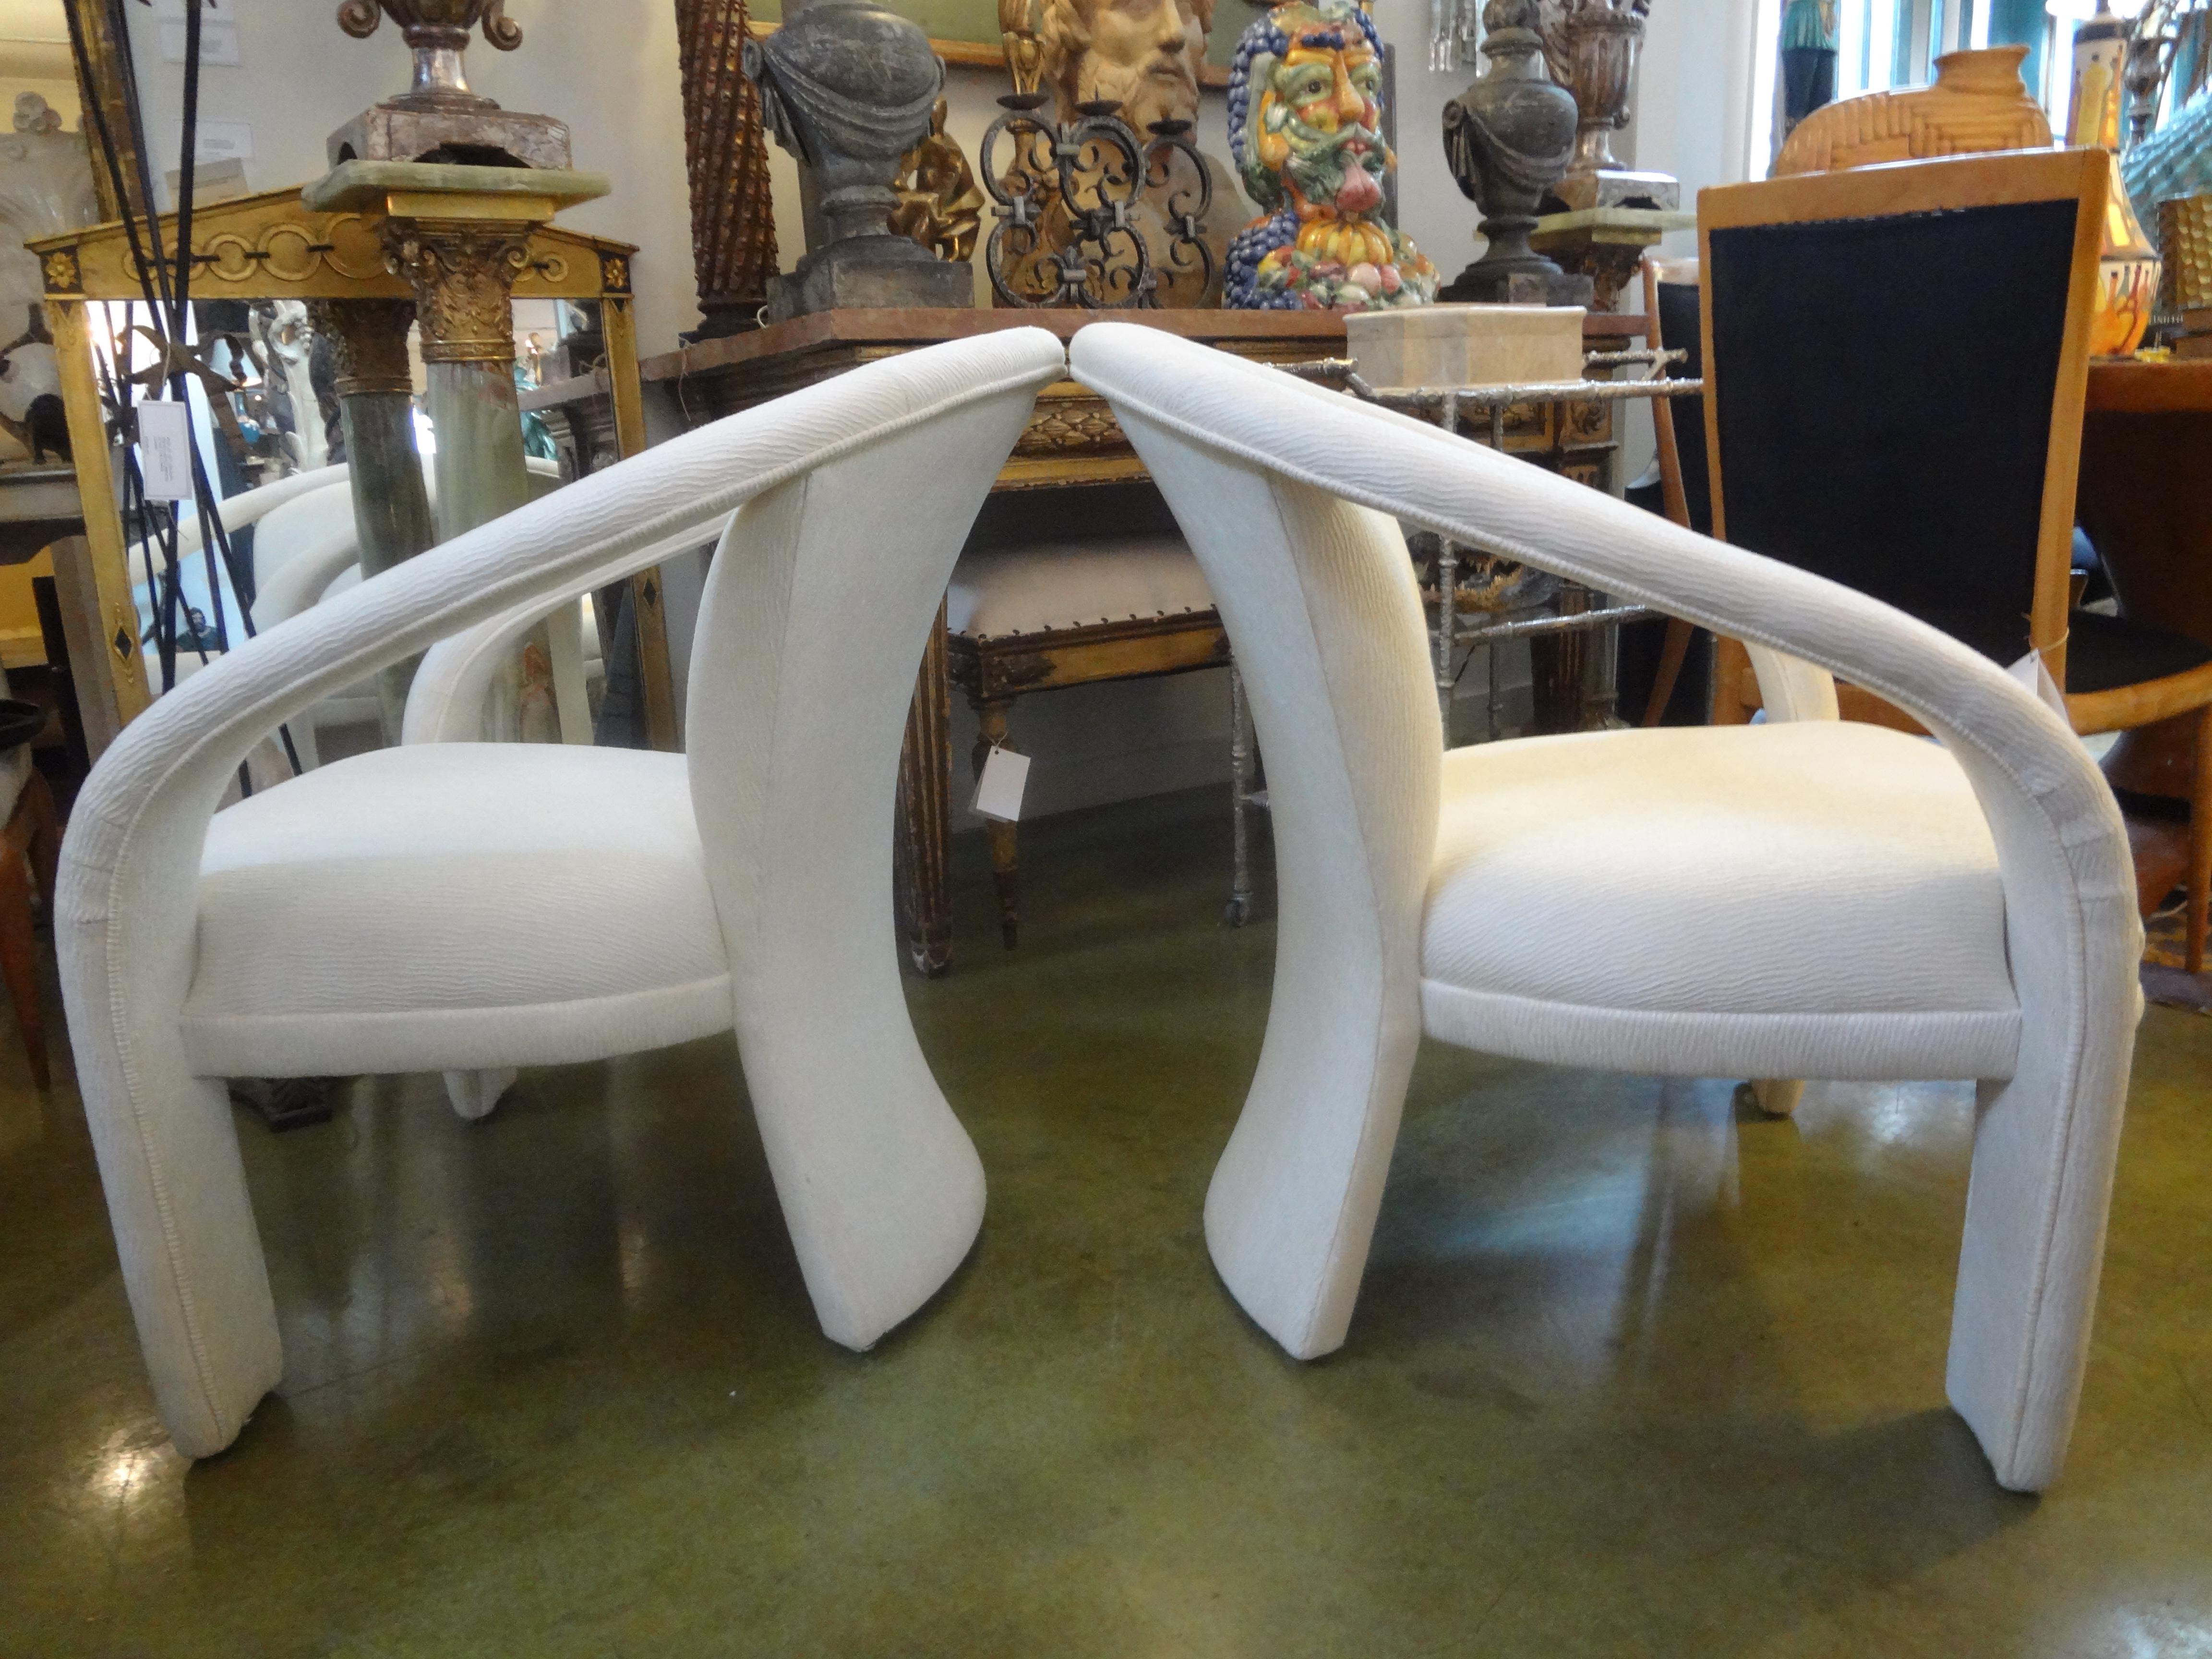 Pair of post modern lounge chairs by Marge Carson. These stunning sculptural upholstered lounge chairs are a Classic post modern design and extremely comfortable. These beautiful chairs were rarely used and the upholstery is in very good condition.